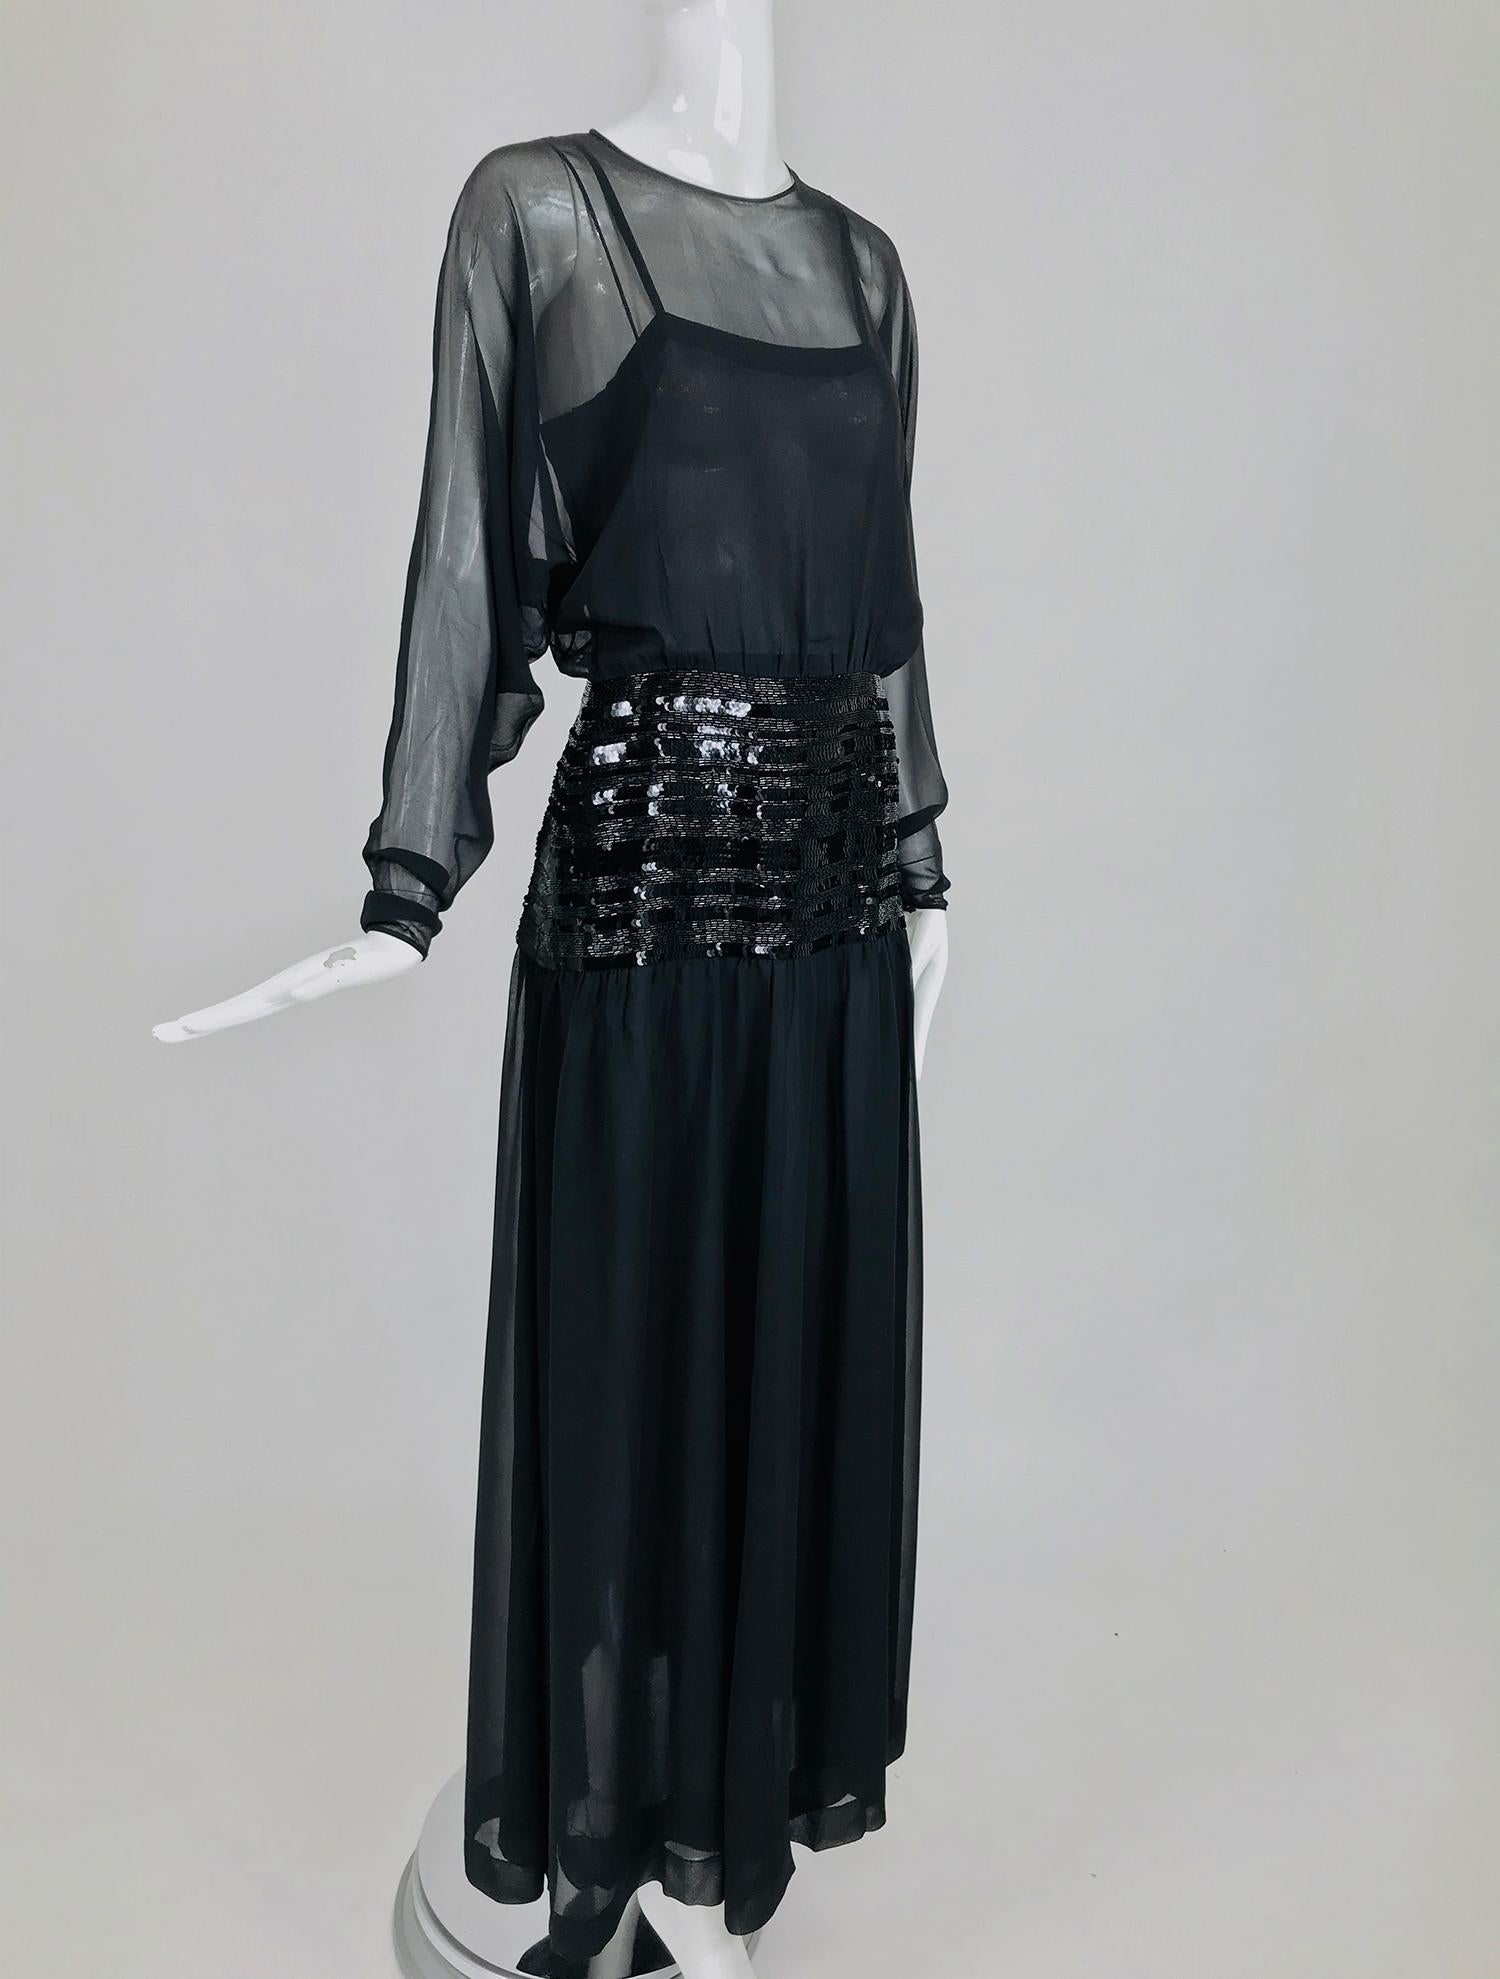 Chanel sheer black silk chiffon beaded hip, dolman sleeve evening gown from the 1980s. Gorgeous gown for any major event, this dress is truly spectacular.  Sheer black silk chiffon dress has a jewel neckline with long bat wing sleeves that taper to